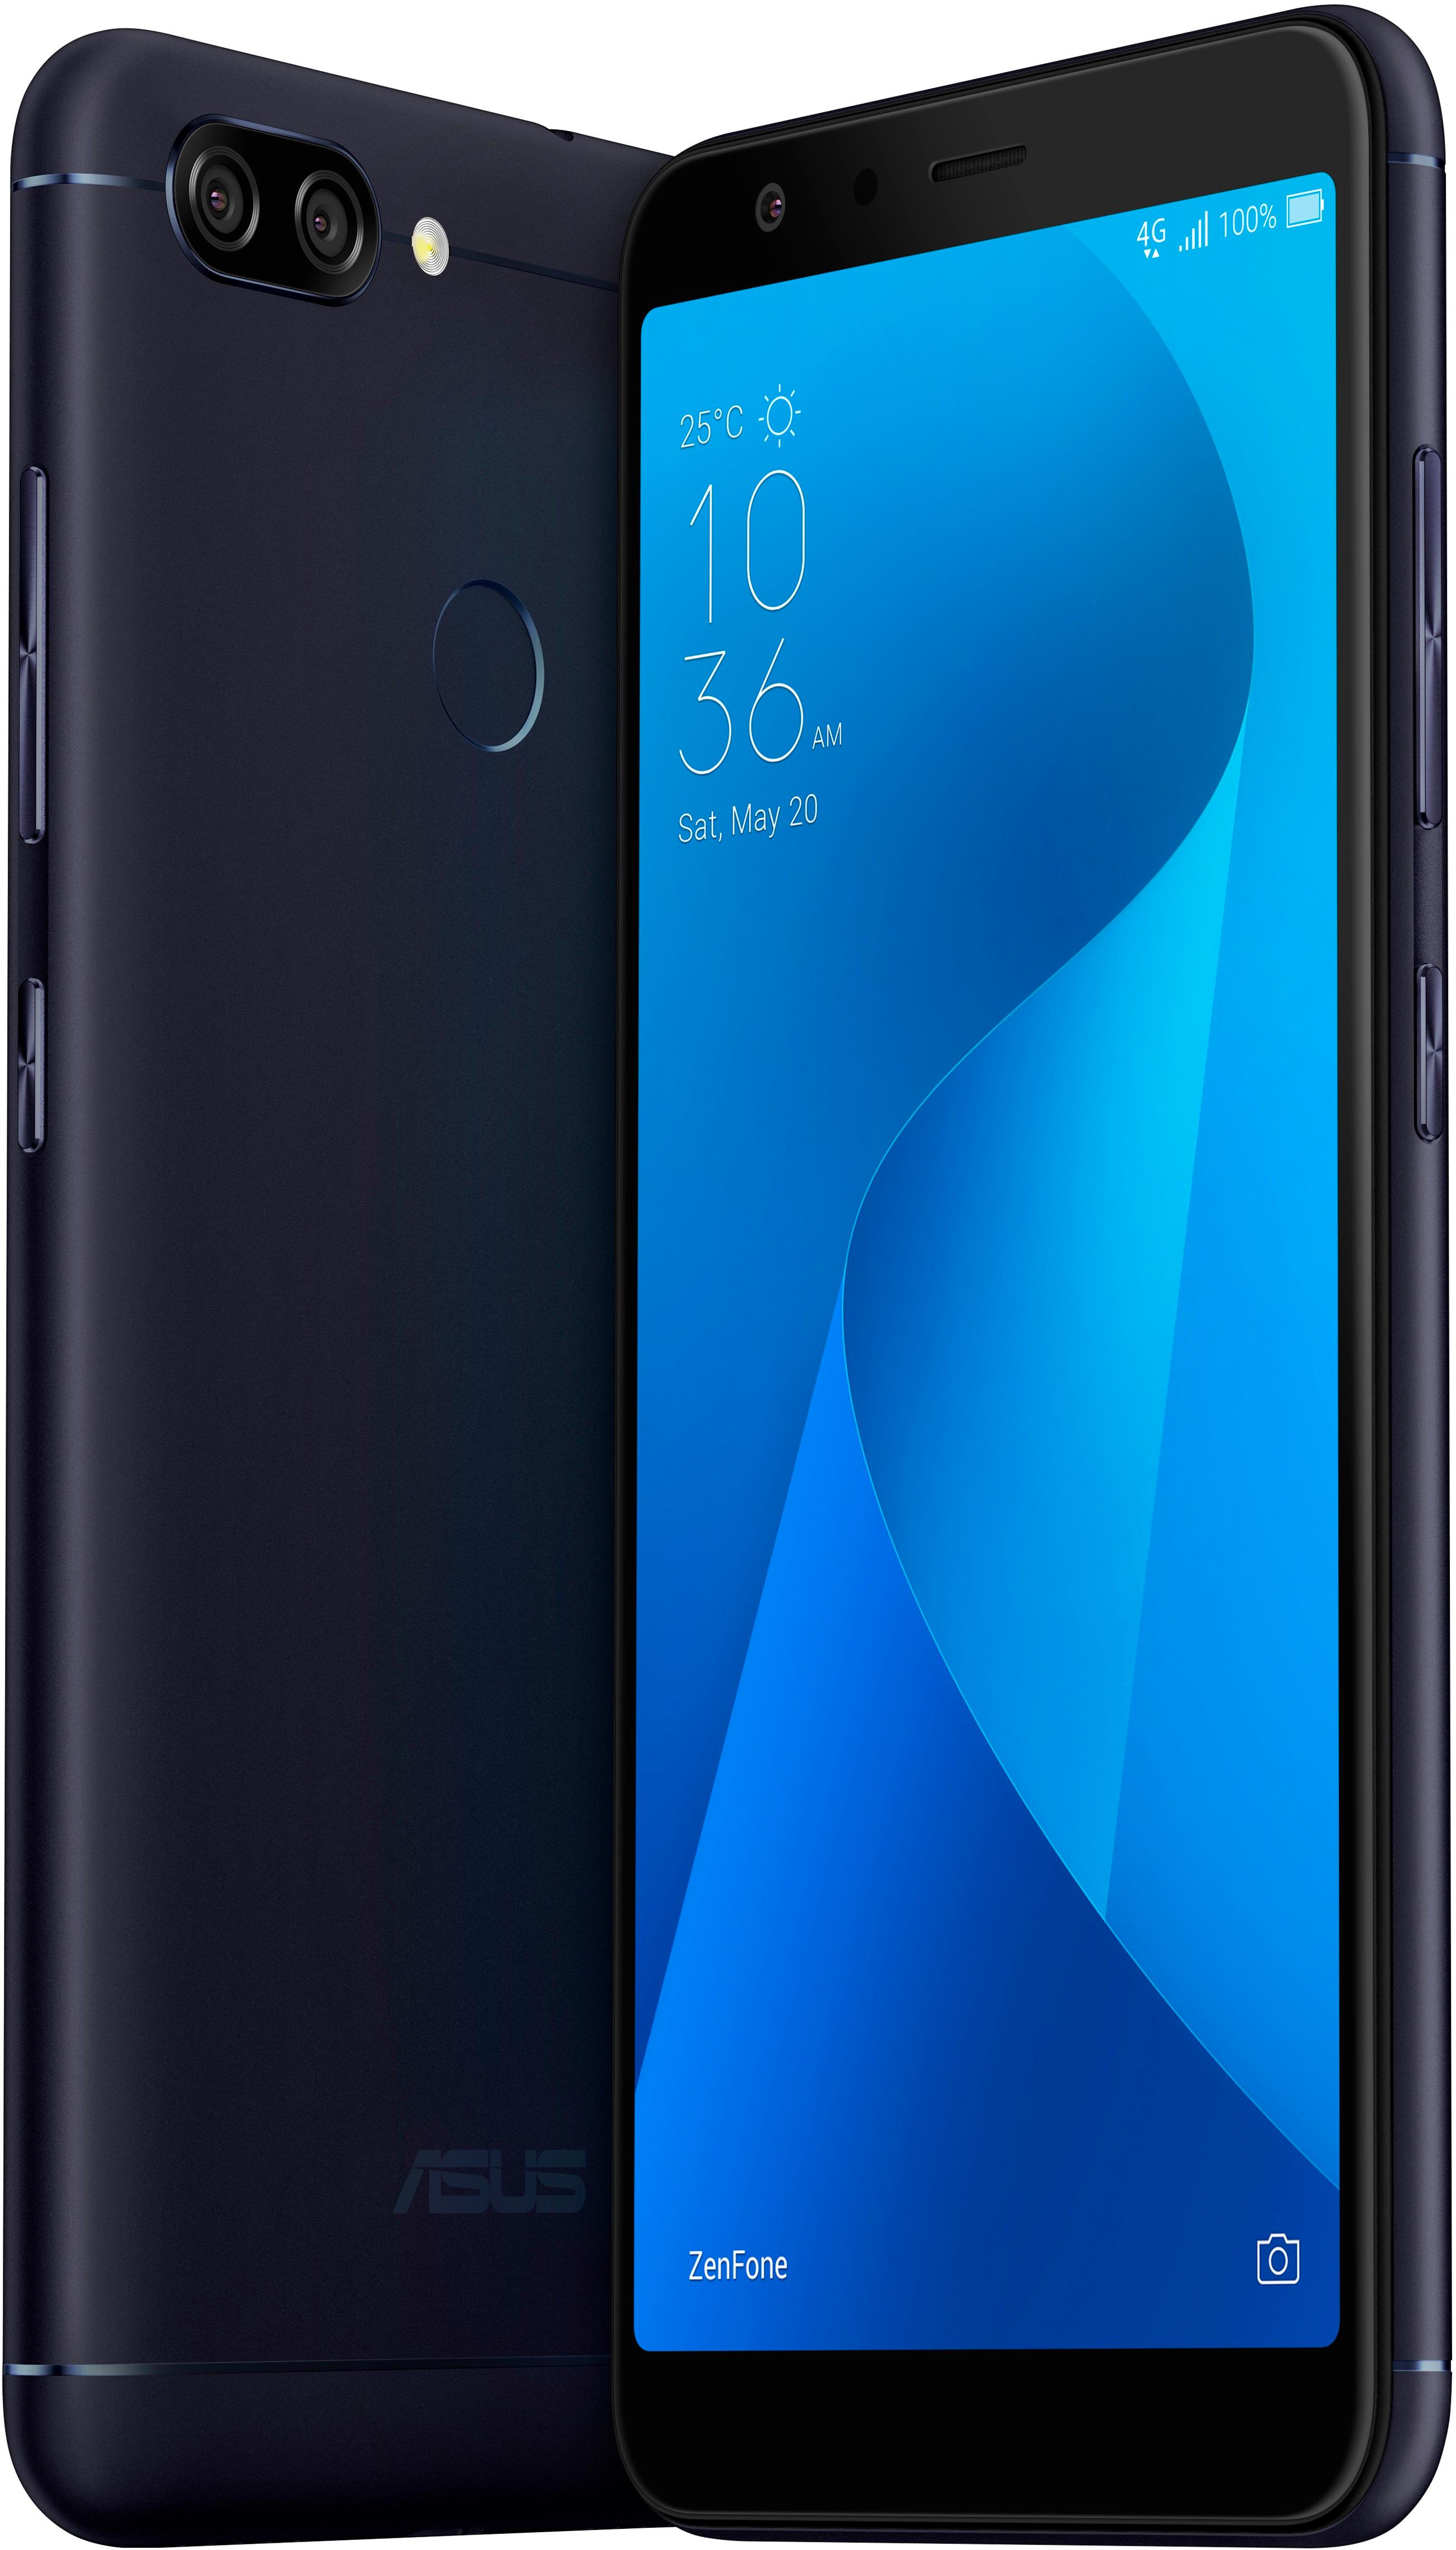 Best Buy: ASUS ZenFone Max Plus M1 4G LTE with 32GB Memory Cell